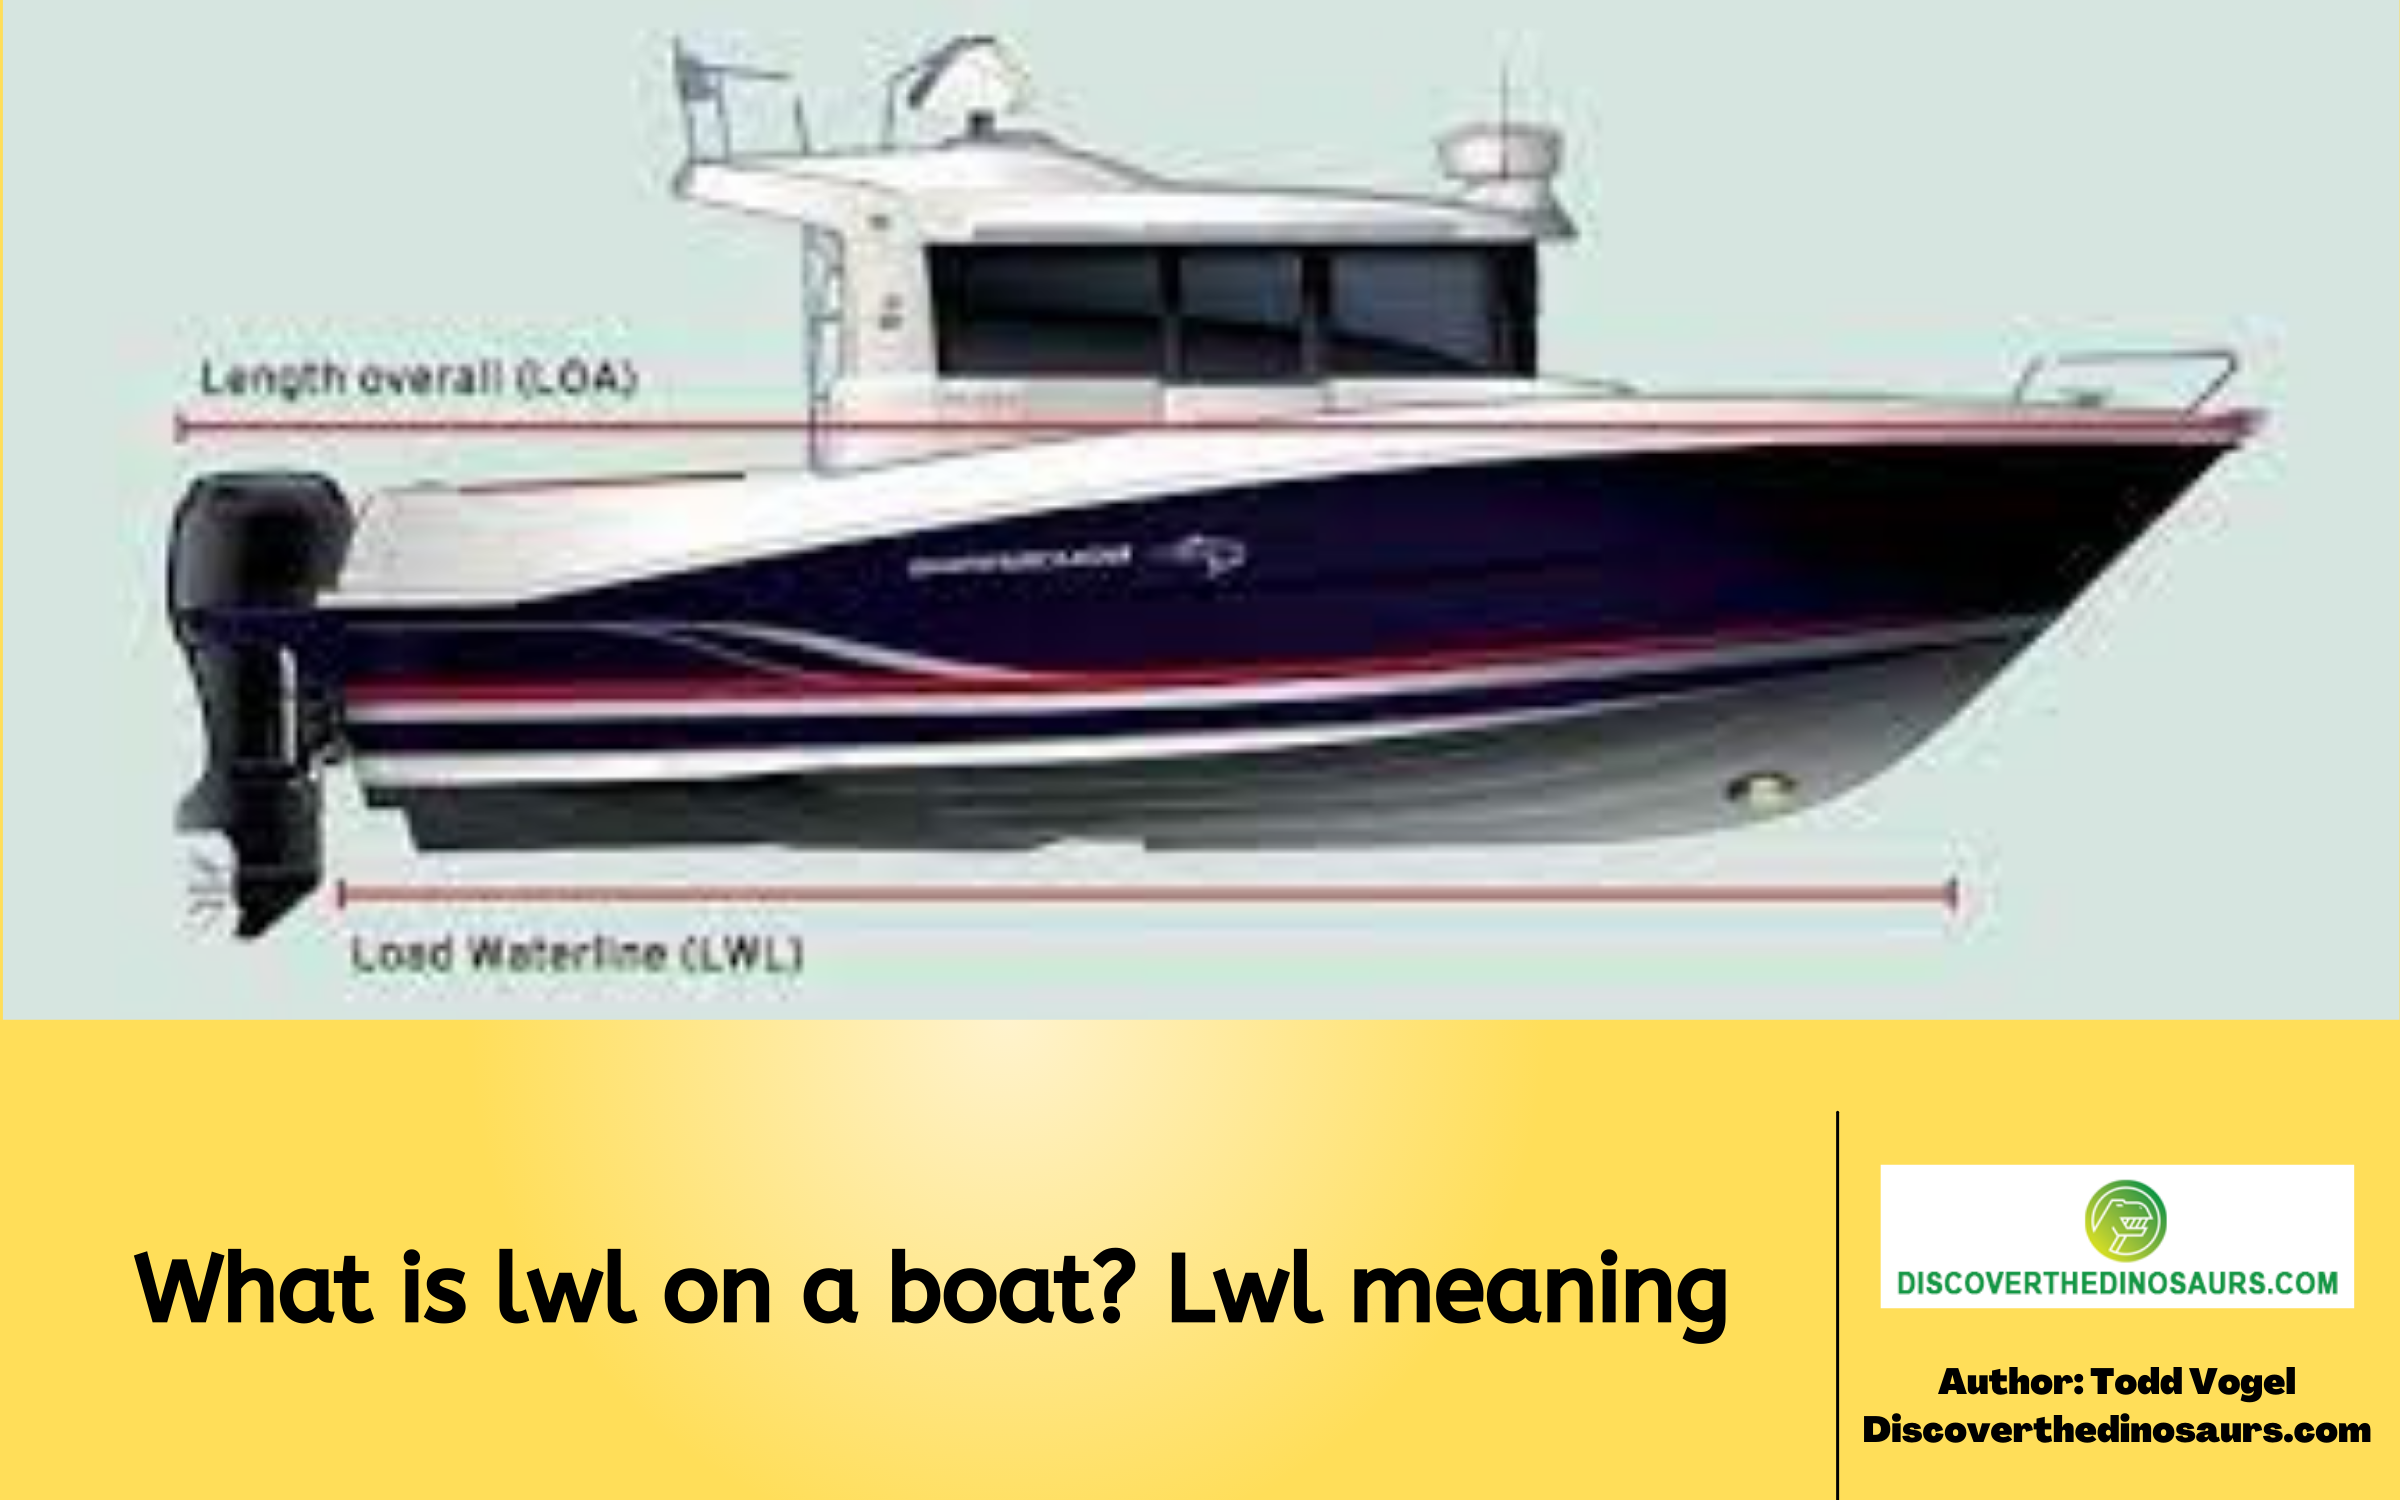 What is lwl on a boat? Lwl meaning